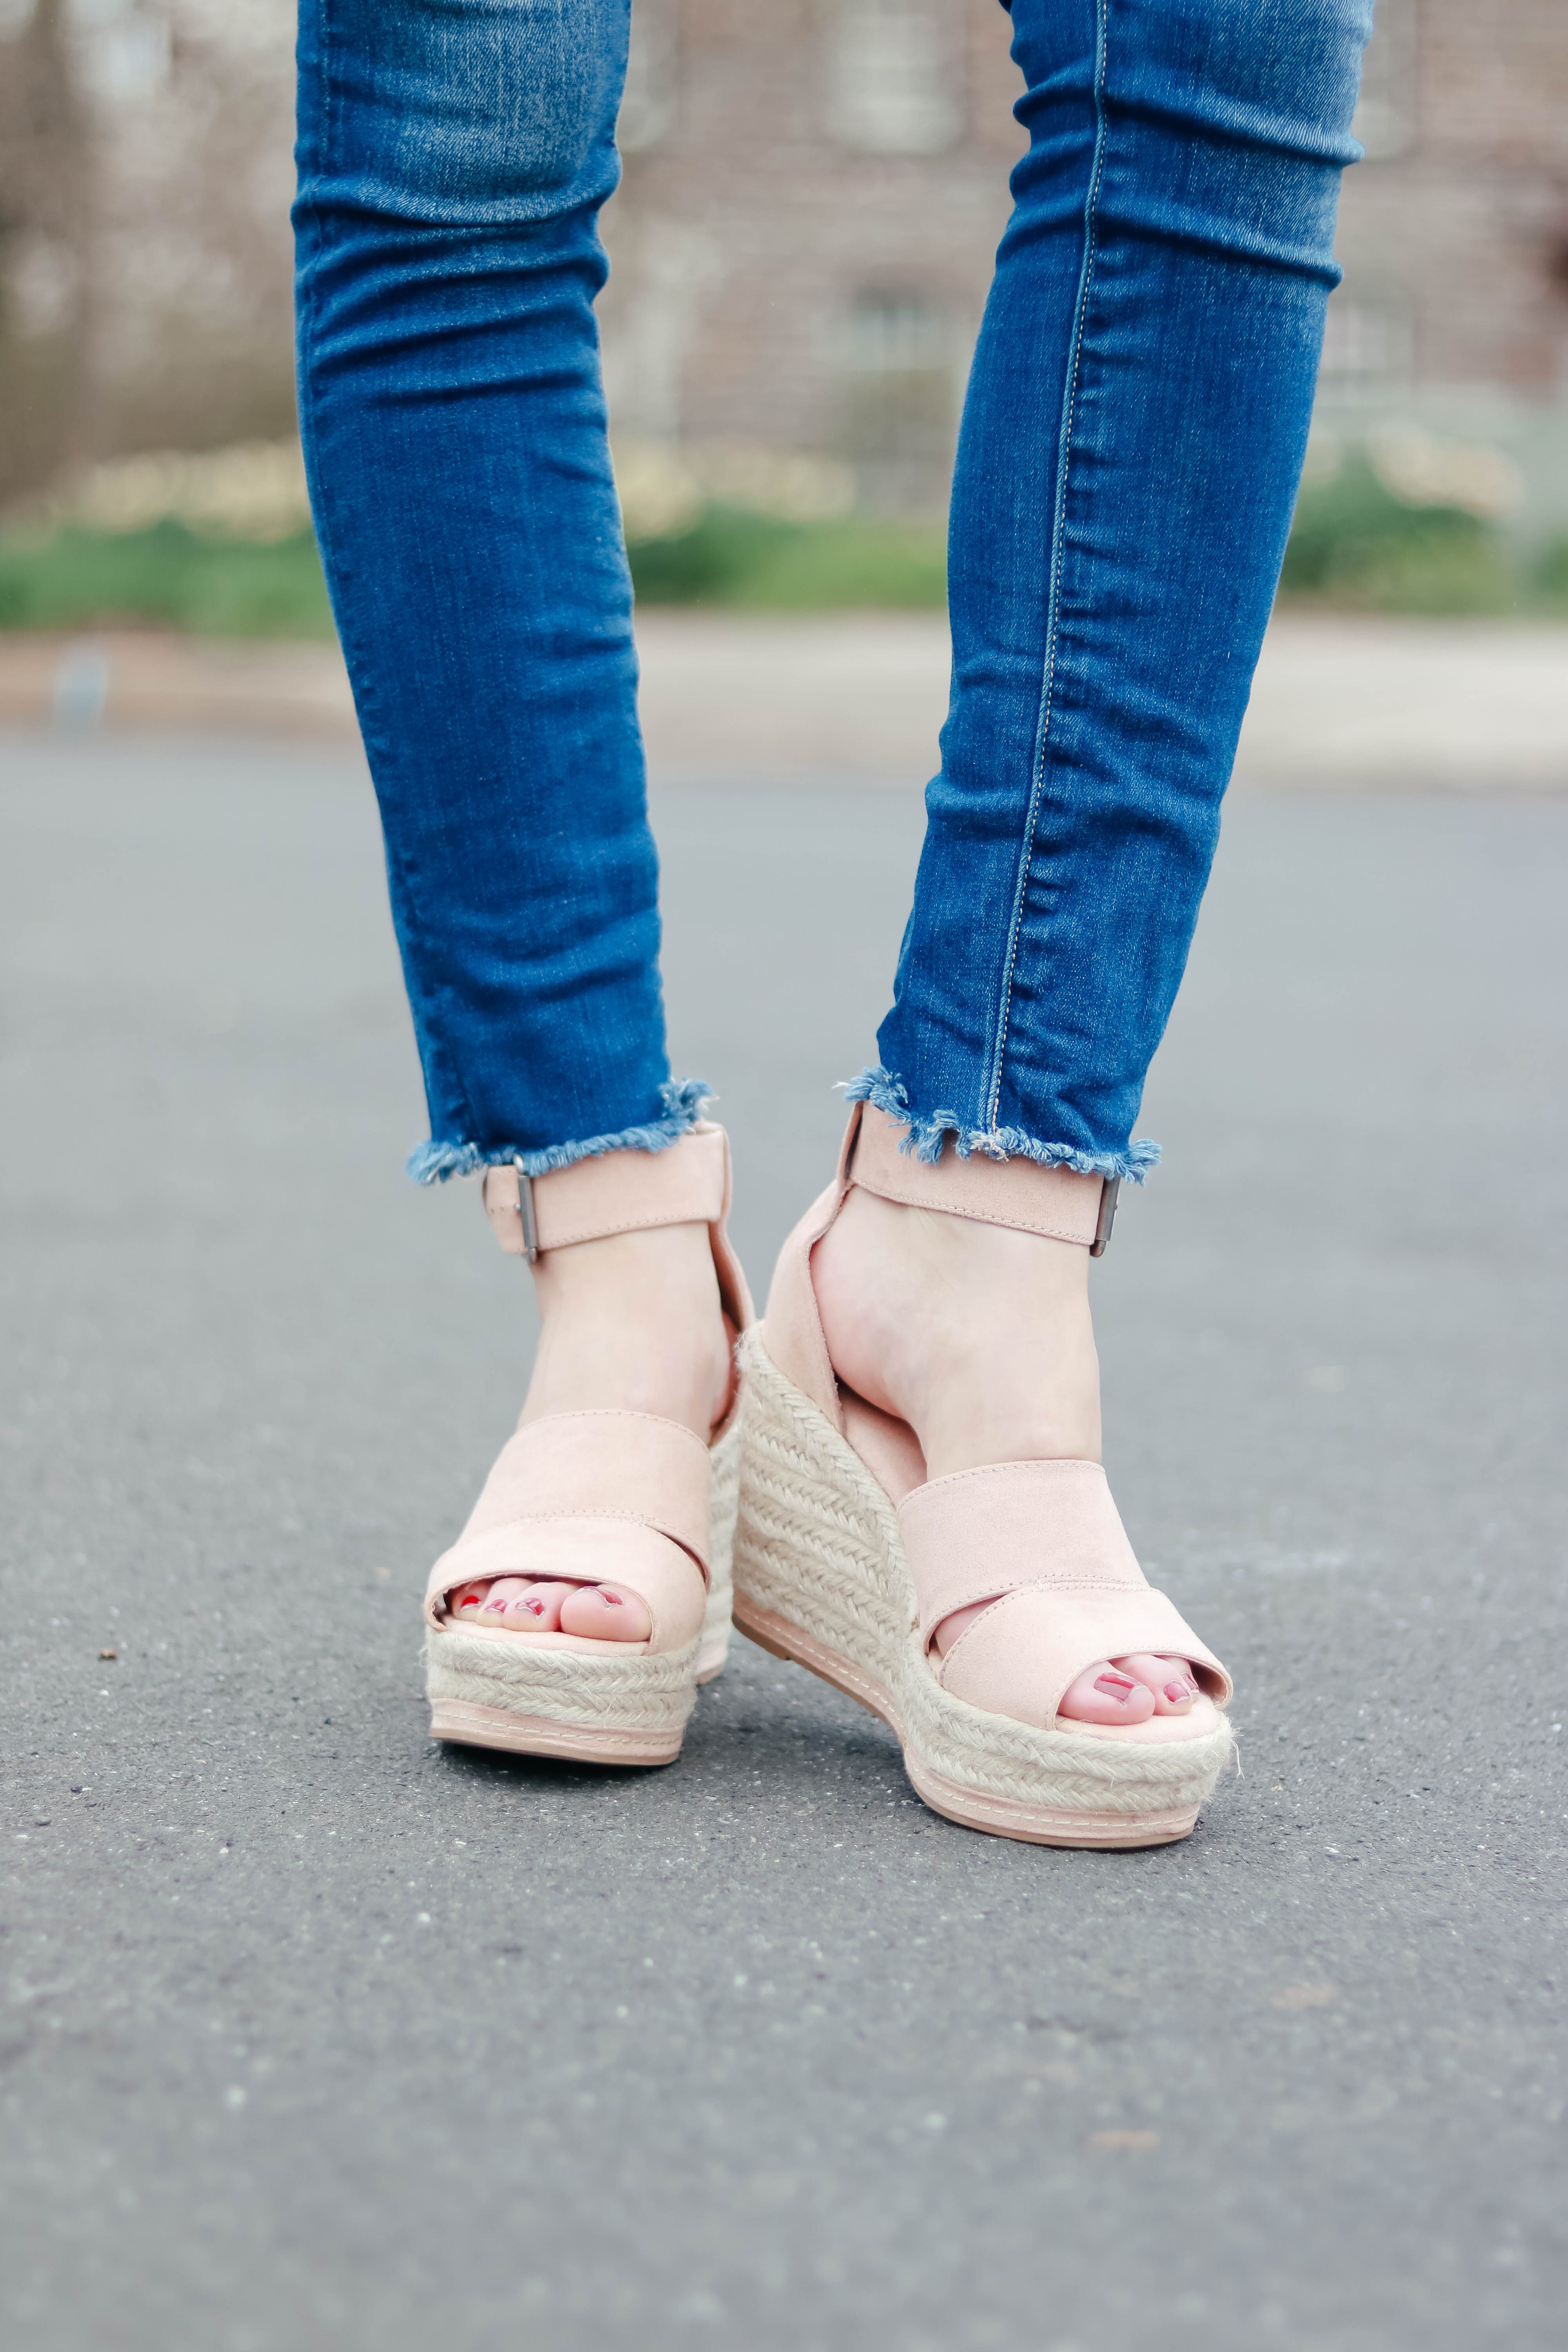 SPRING SHOES CAPSULE - 10 Spring Shoes for Every Occasion and Budget! on Coming Up Roses